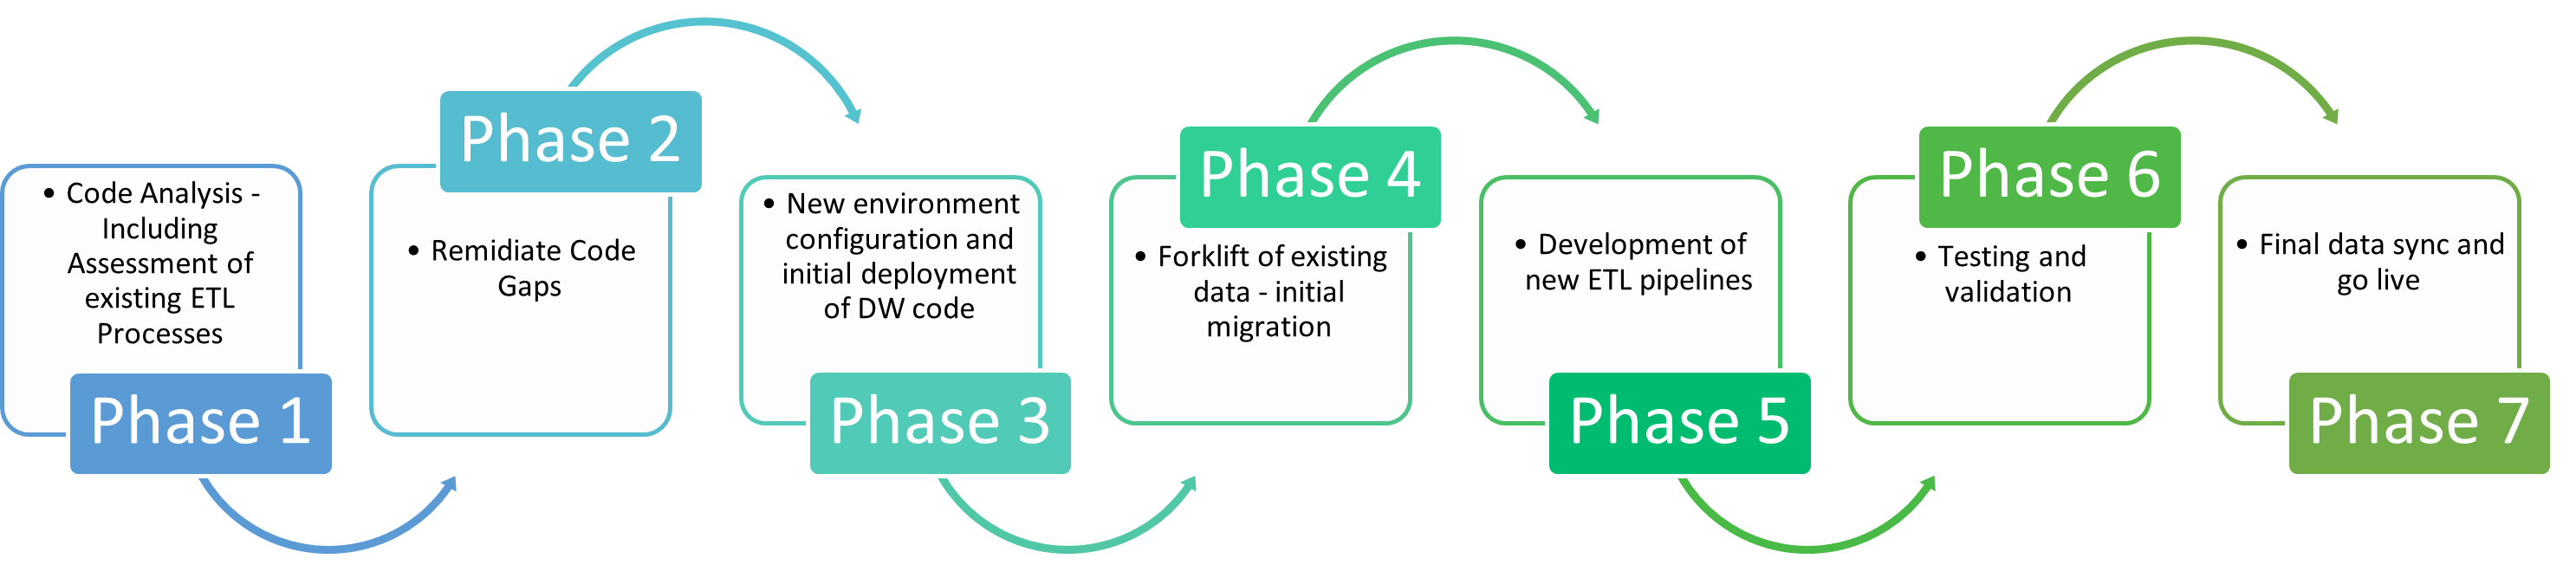 Azure Synapse Guided Pathway Phases Image